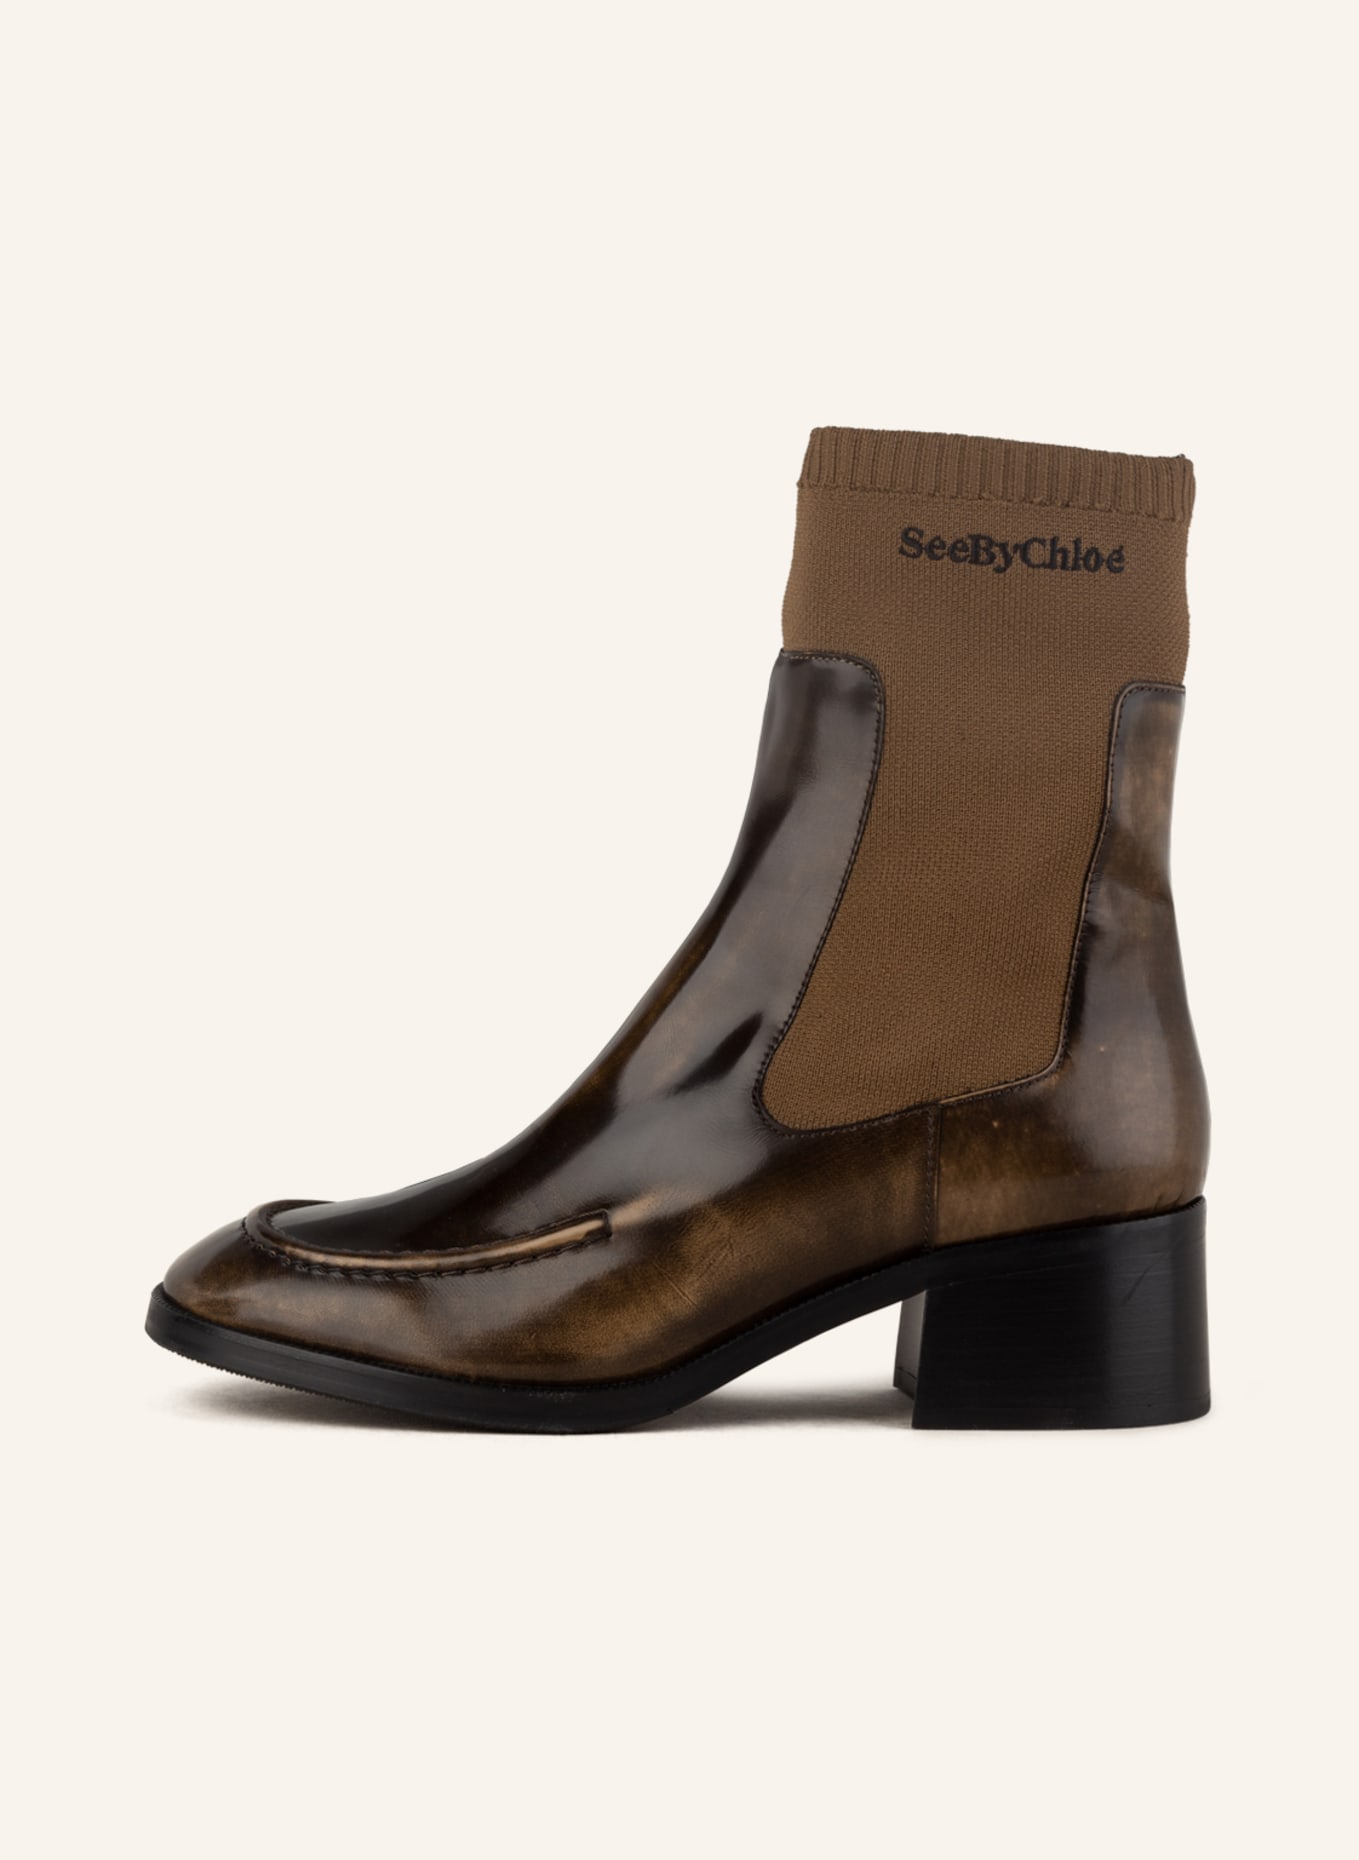 SEE BY CHLOÉ Chelsea-Boots WENDY, Farbe: 110/415 Olive (Bild 4)